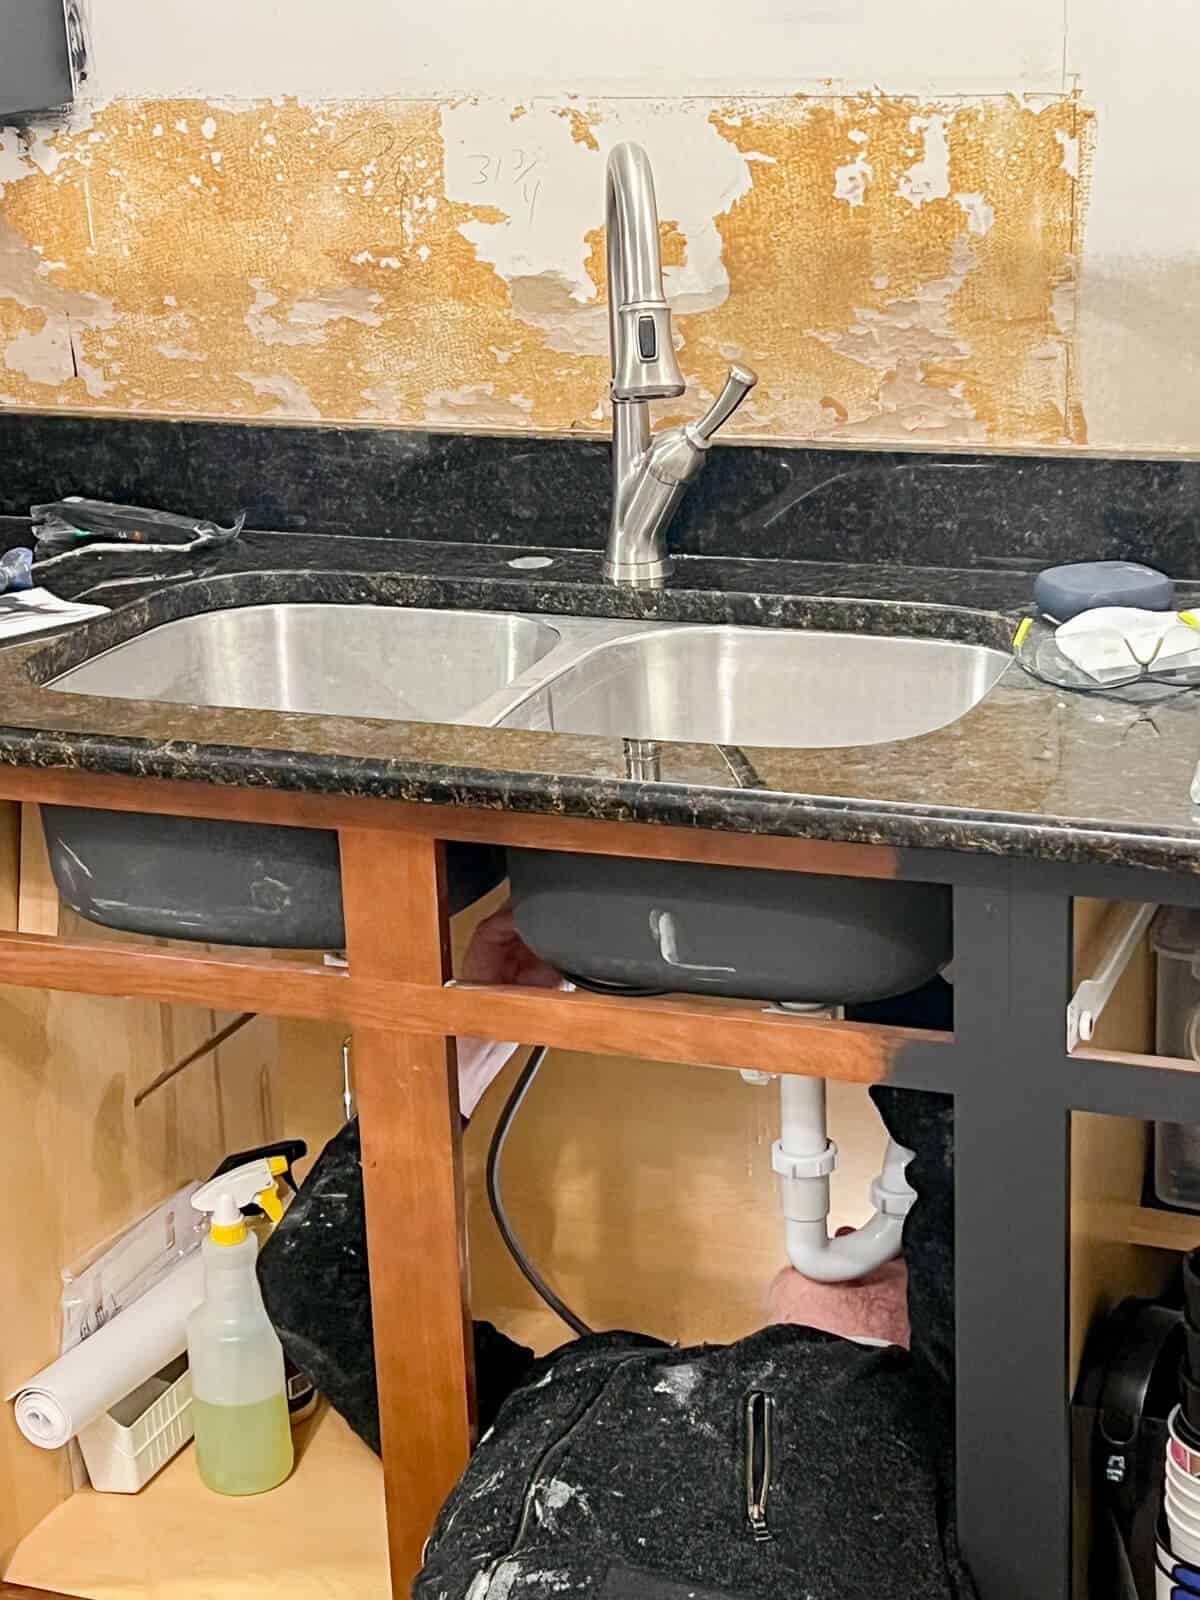 Man looking under a kitchen sink cabinet to begin disconnecting plumbing